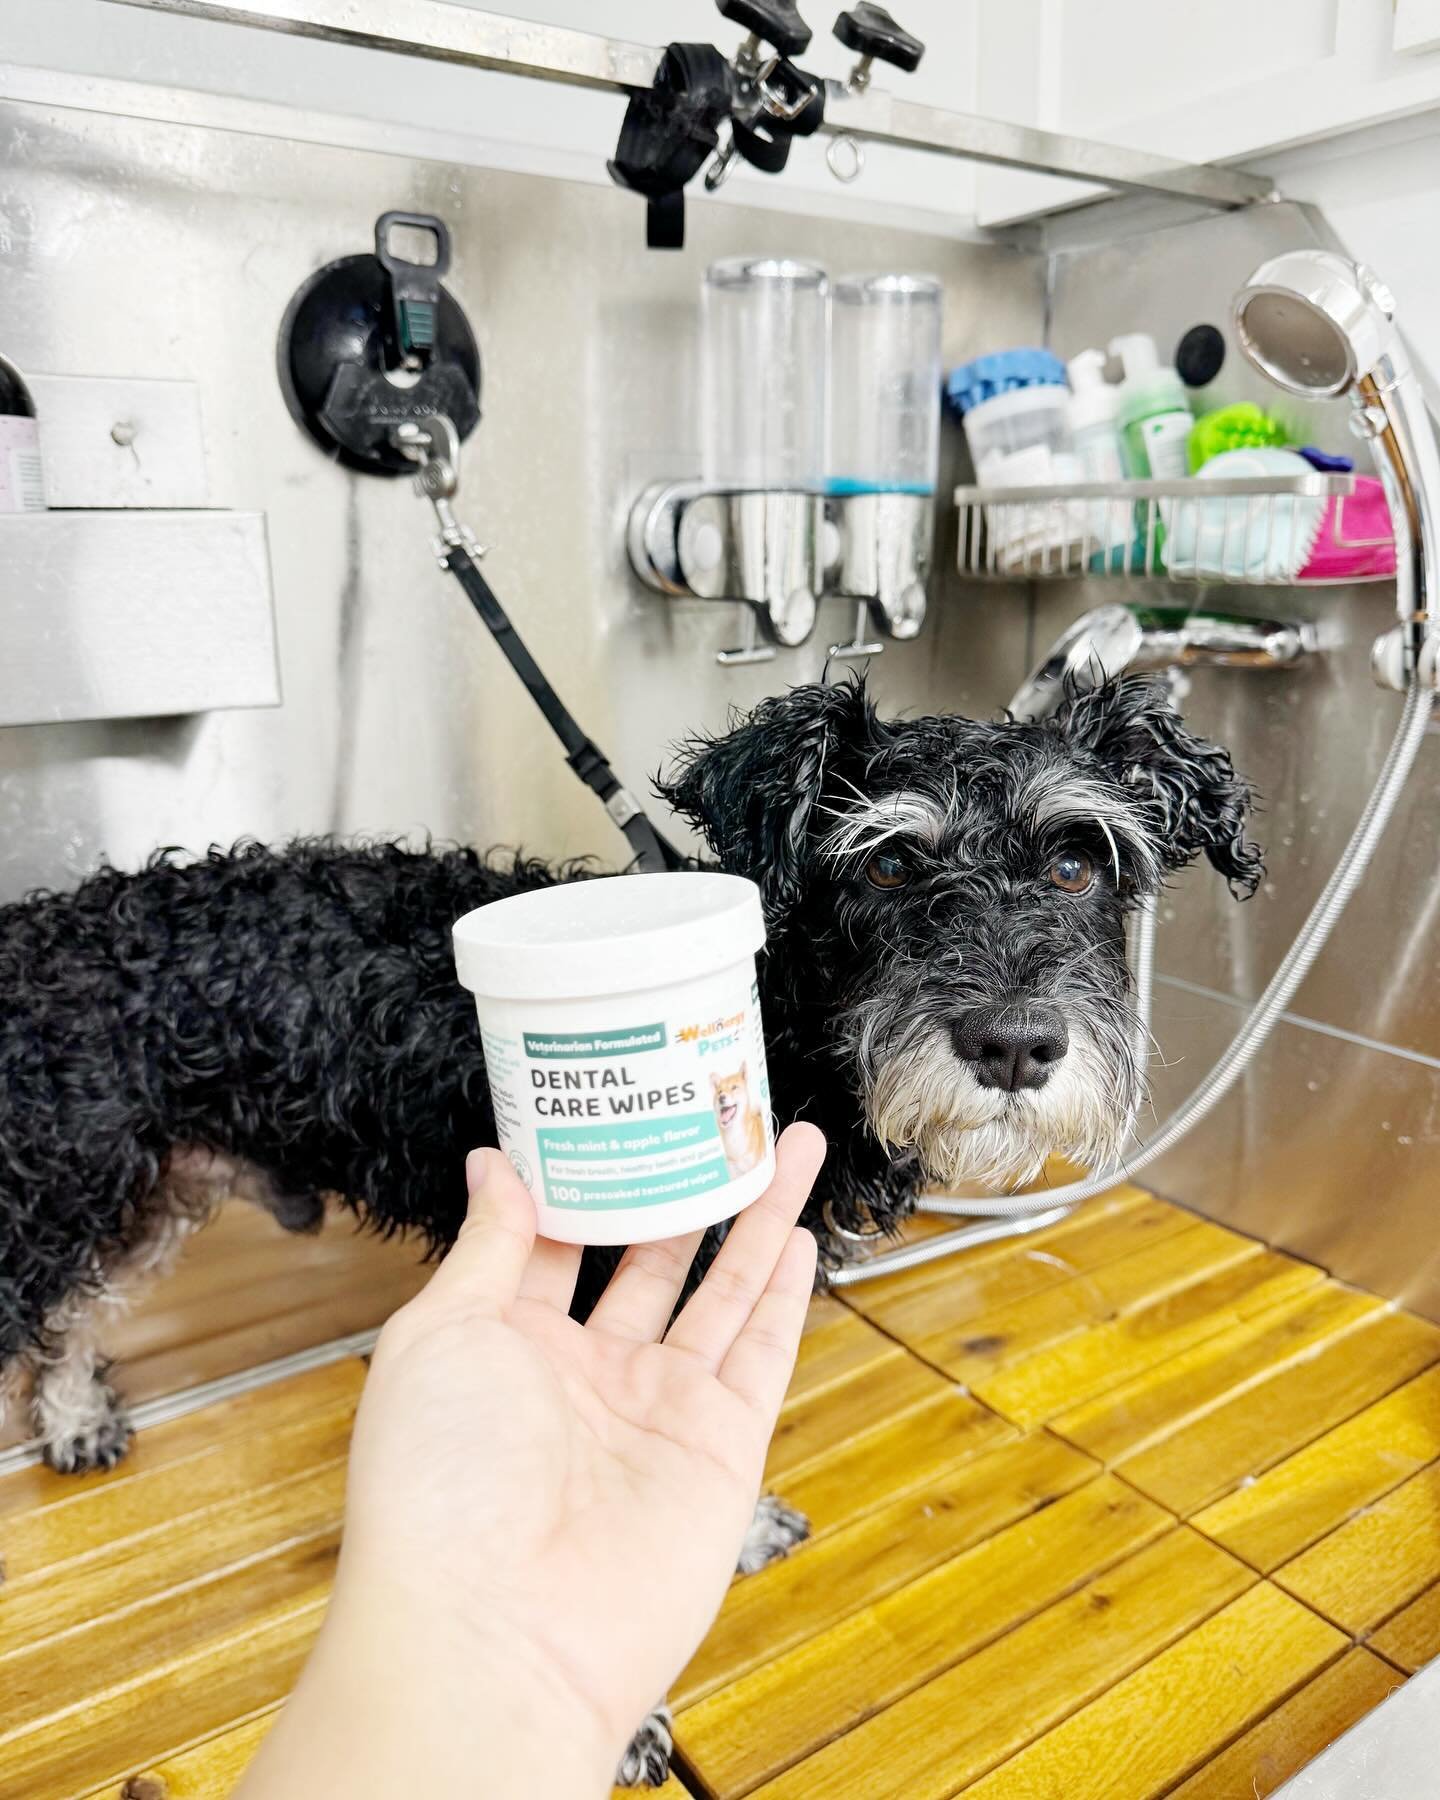 Teeth brushing reduces plaque, freshens breath, &amp; fights bacteria. We like to use @wellnergypets dental care wipes! Brushing 3 times a week is the minimum recommendation to help remove plaque and prevent tartar accumulation.

#pupwash911 #gettail